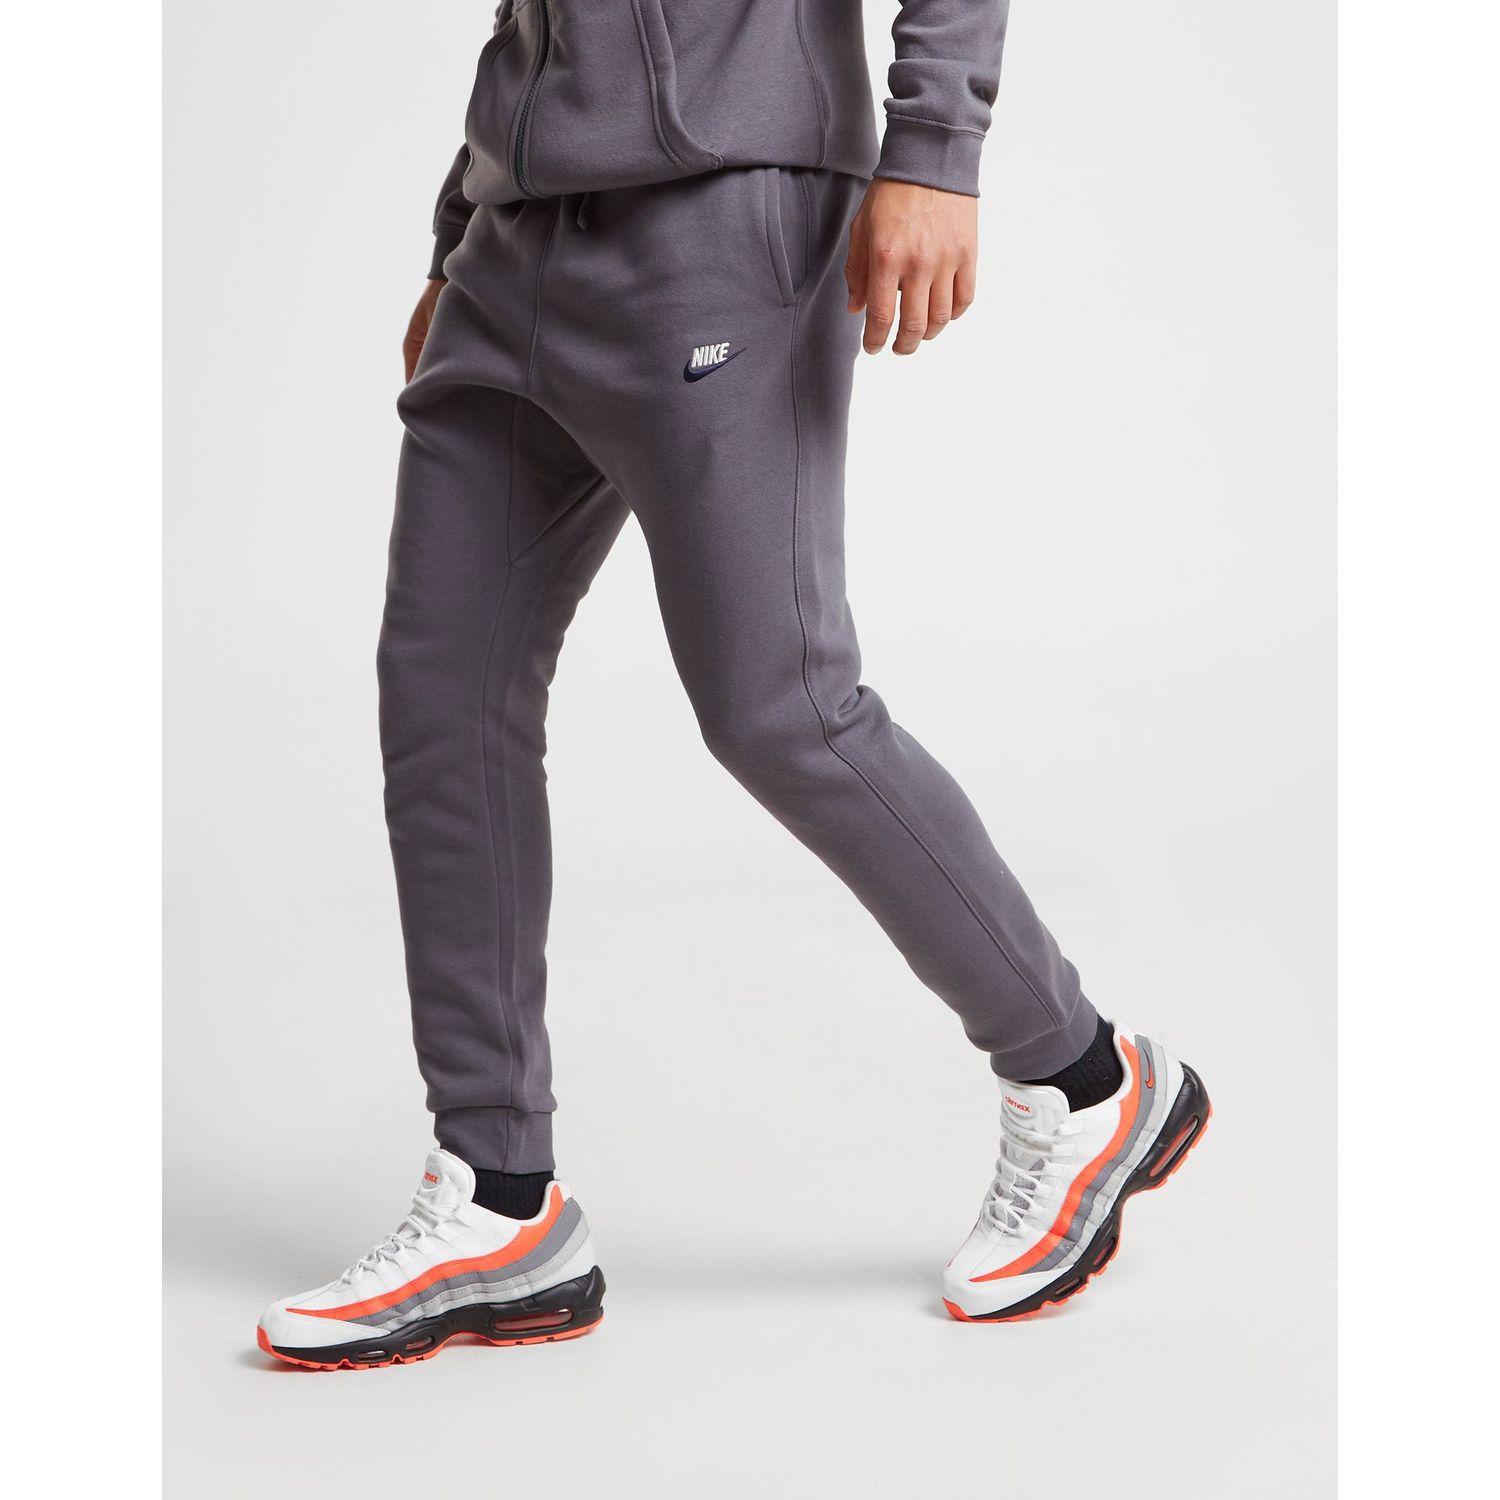 nike grey joggers with red tick